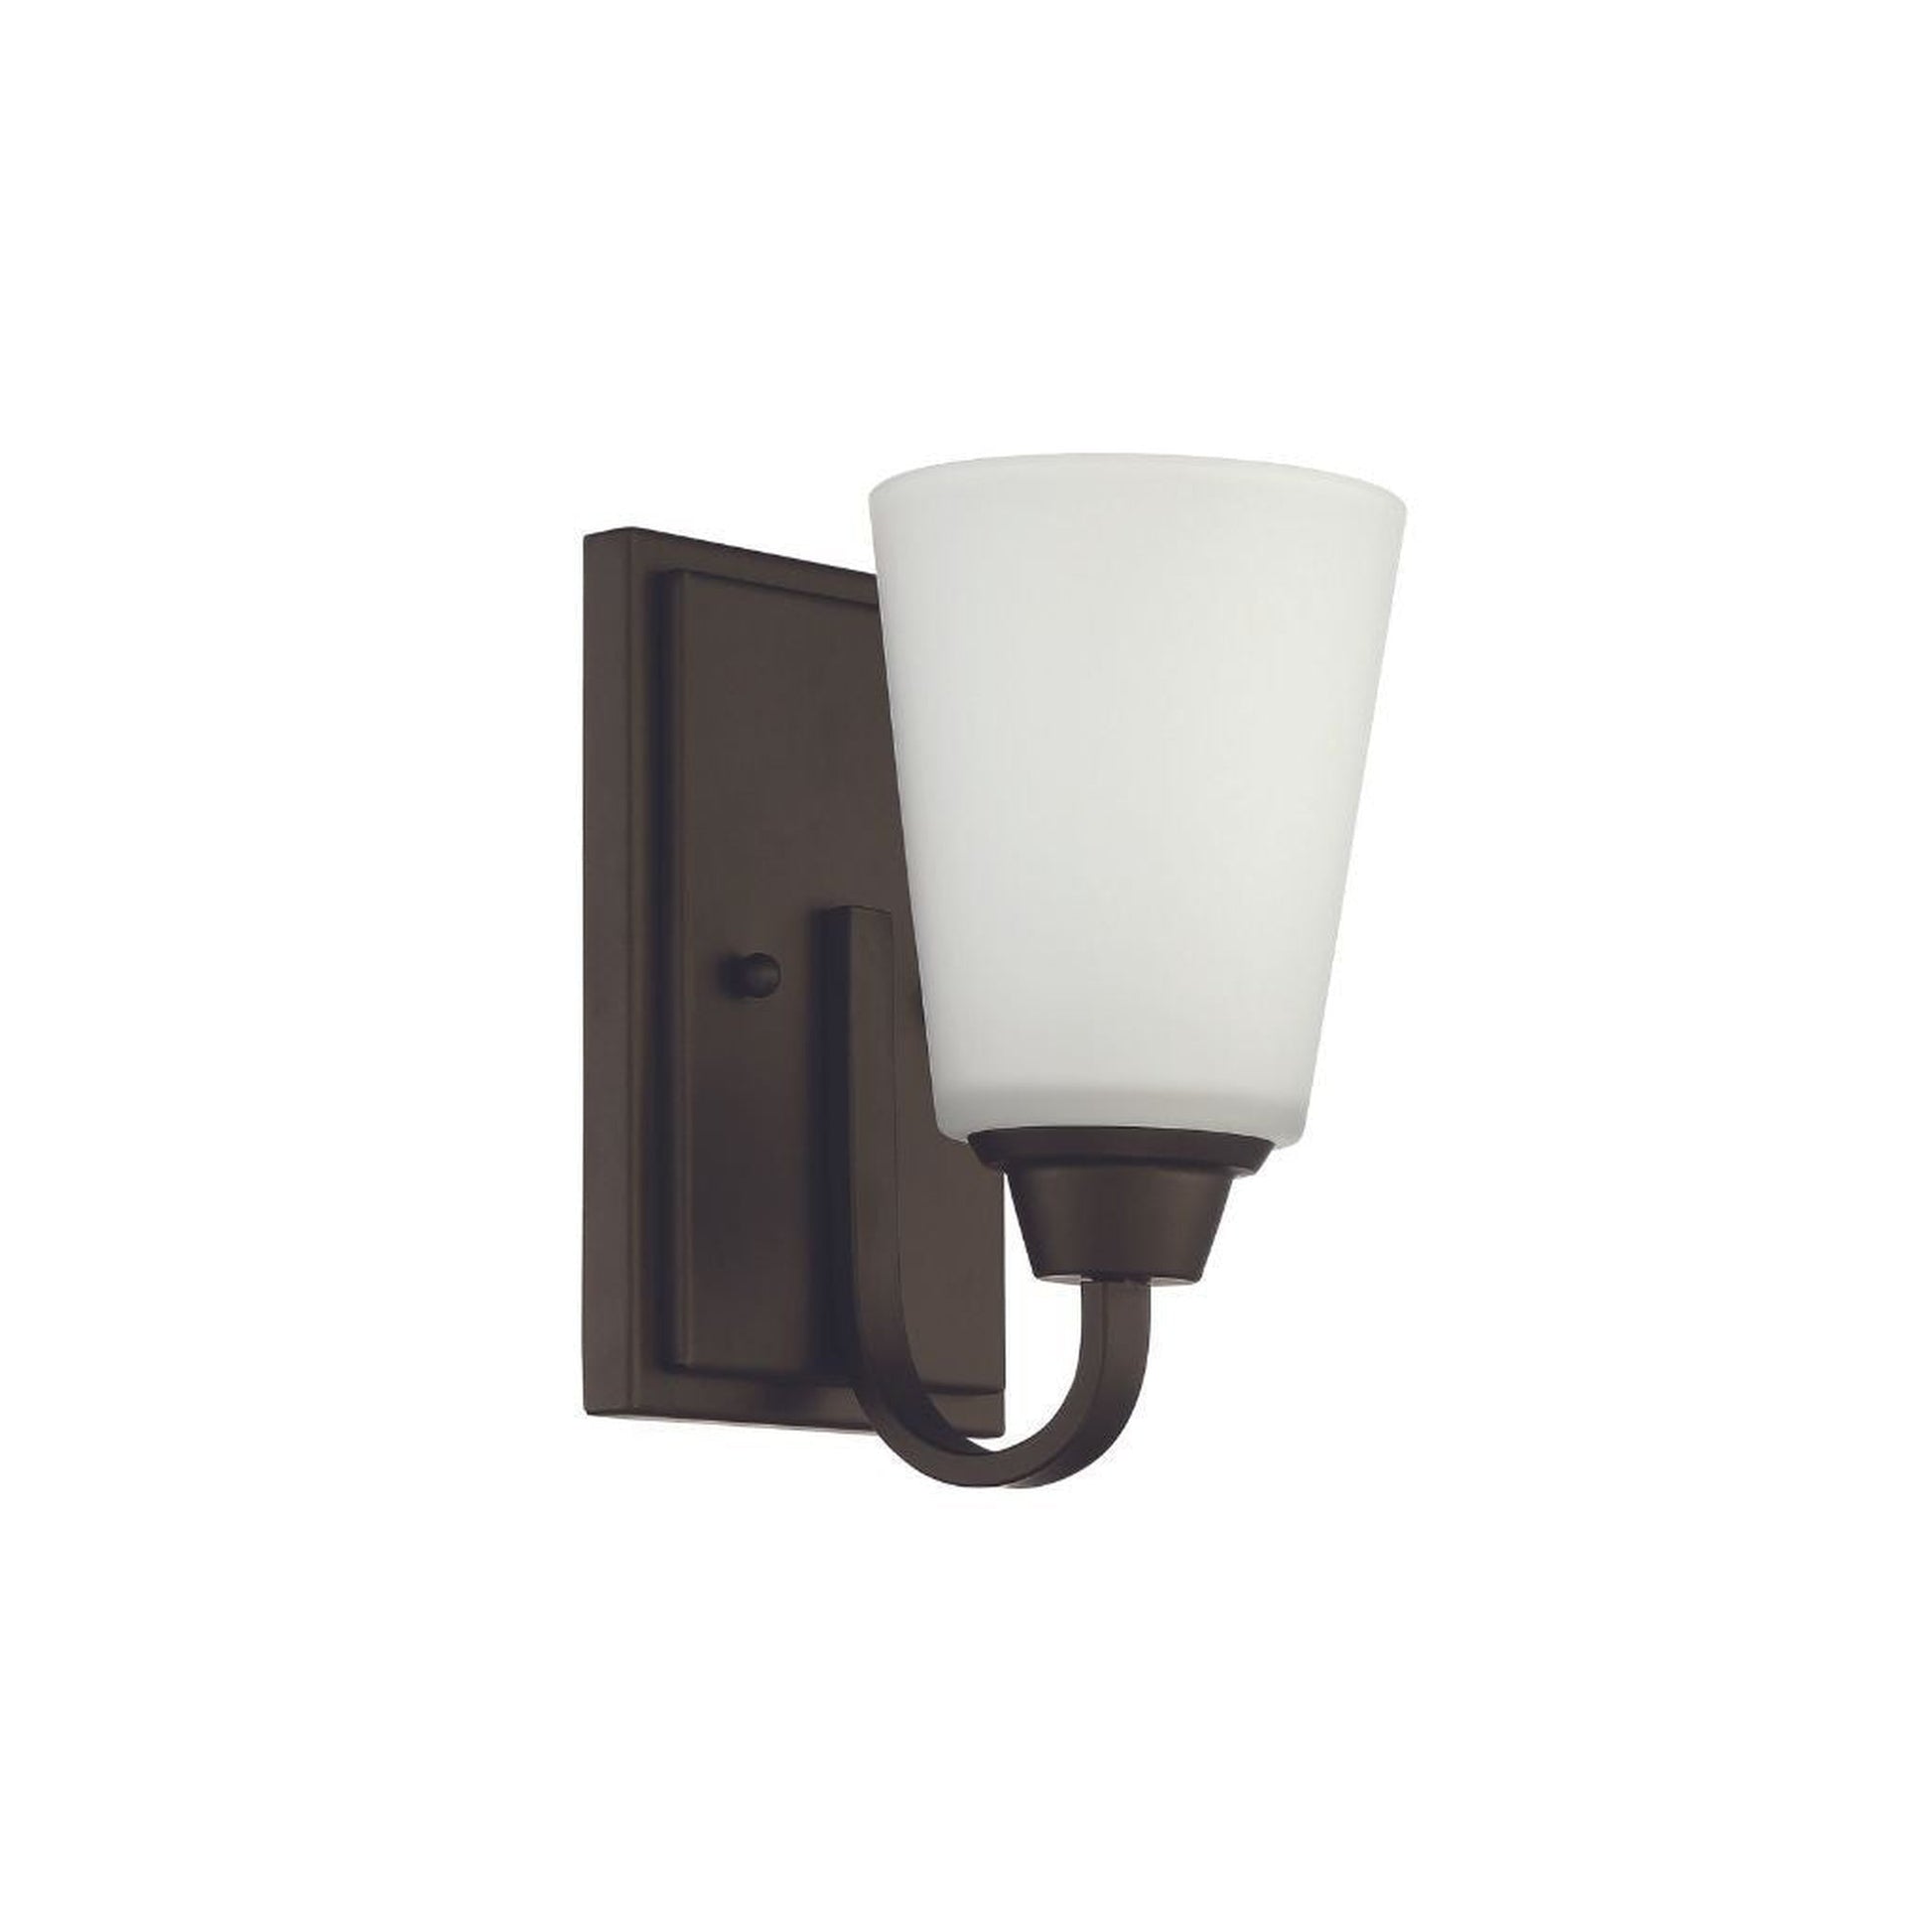 Craftmade Grace 5" x 9" 1-Light Espresso Wall Sconce With White Frosted Glass Shade